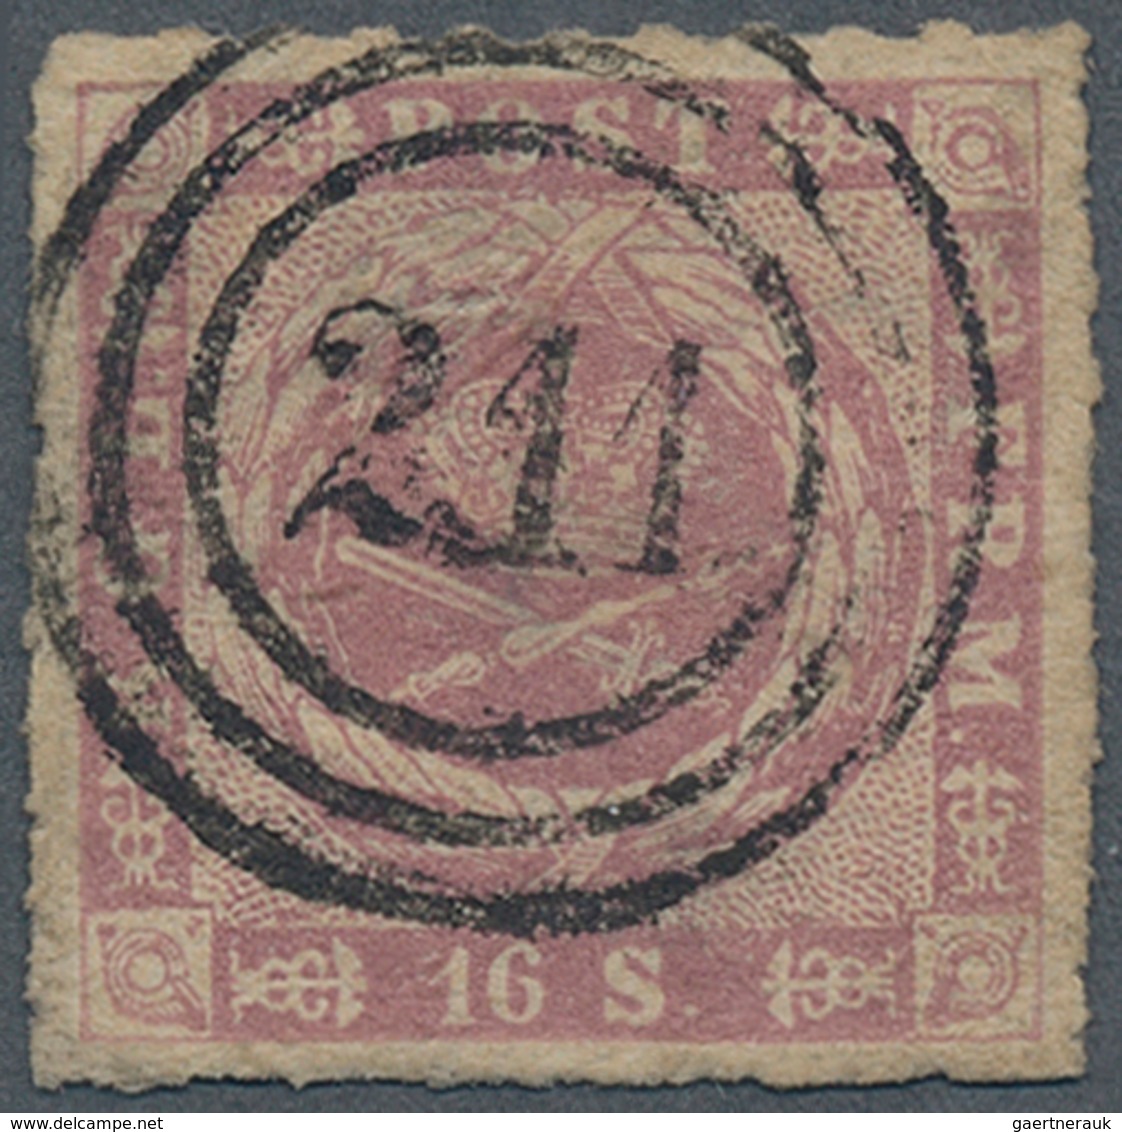 Dänemark: 1863, 16 Sk Rose-lilac, Rouletted 11, With Clear Numeral Cancellation "211" (KBH NORREBRO - Ongebruikt